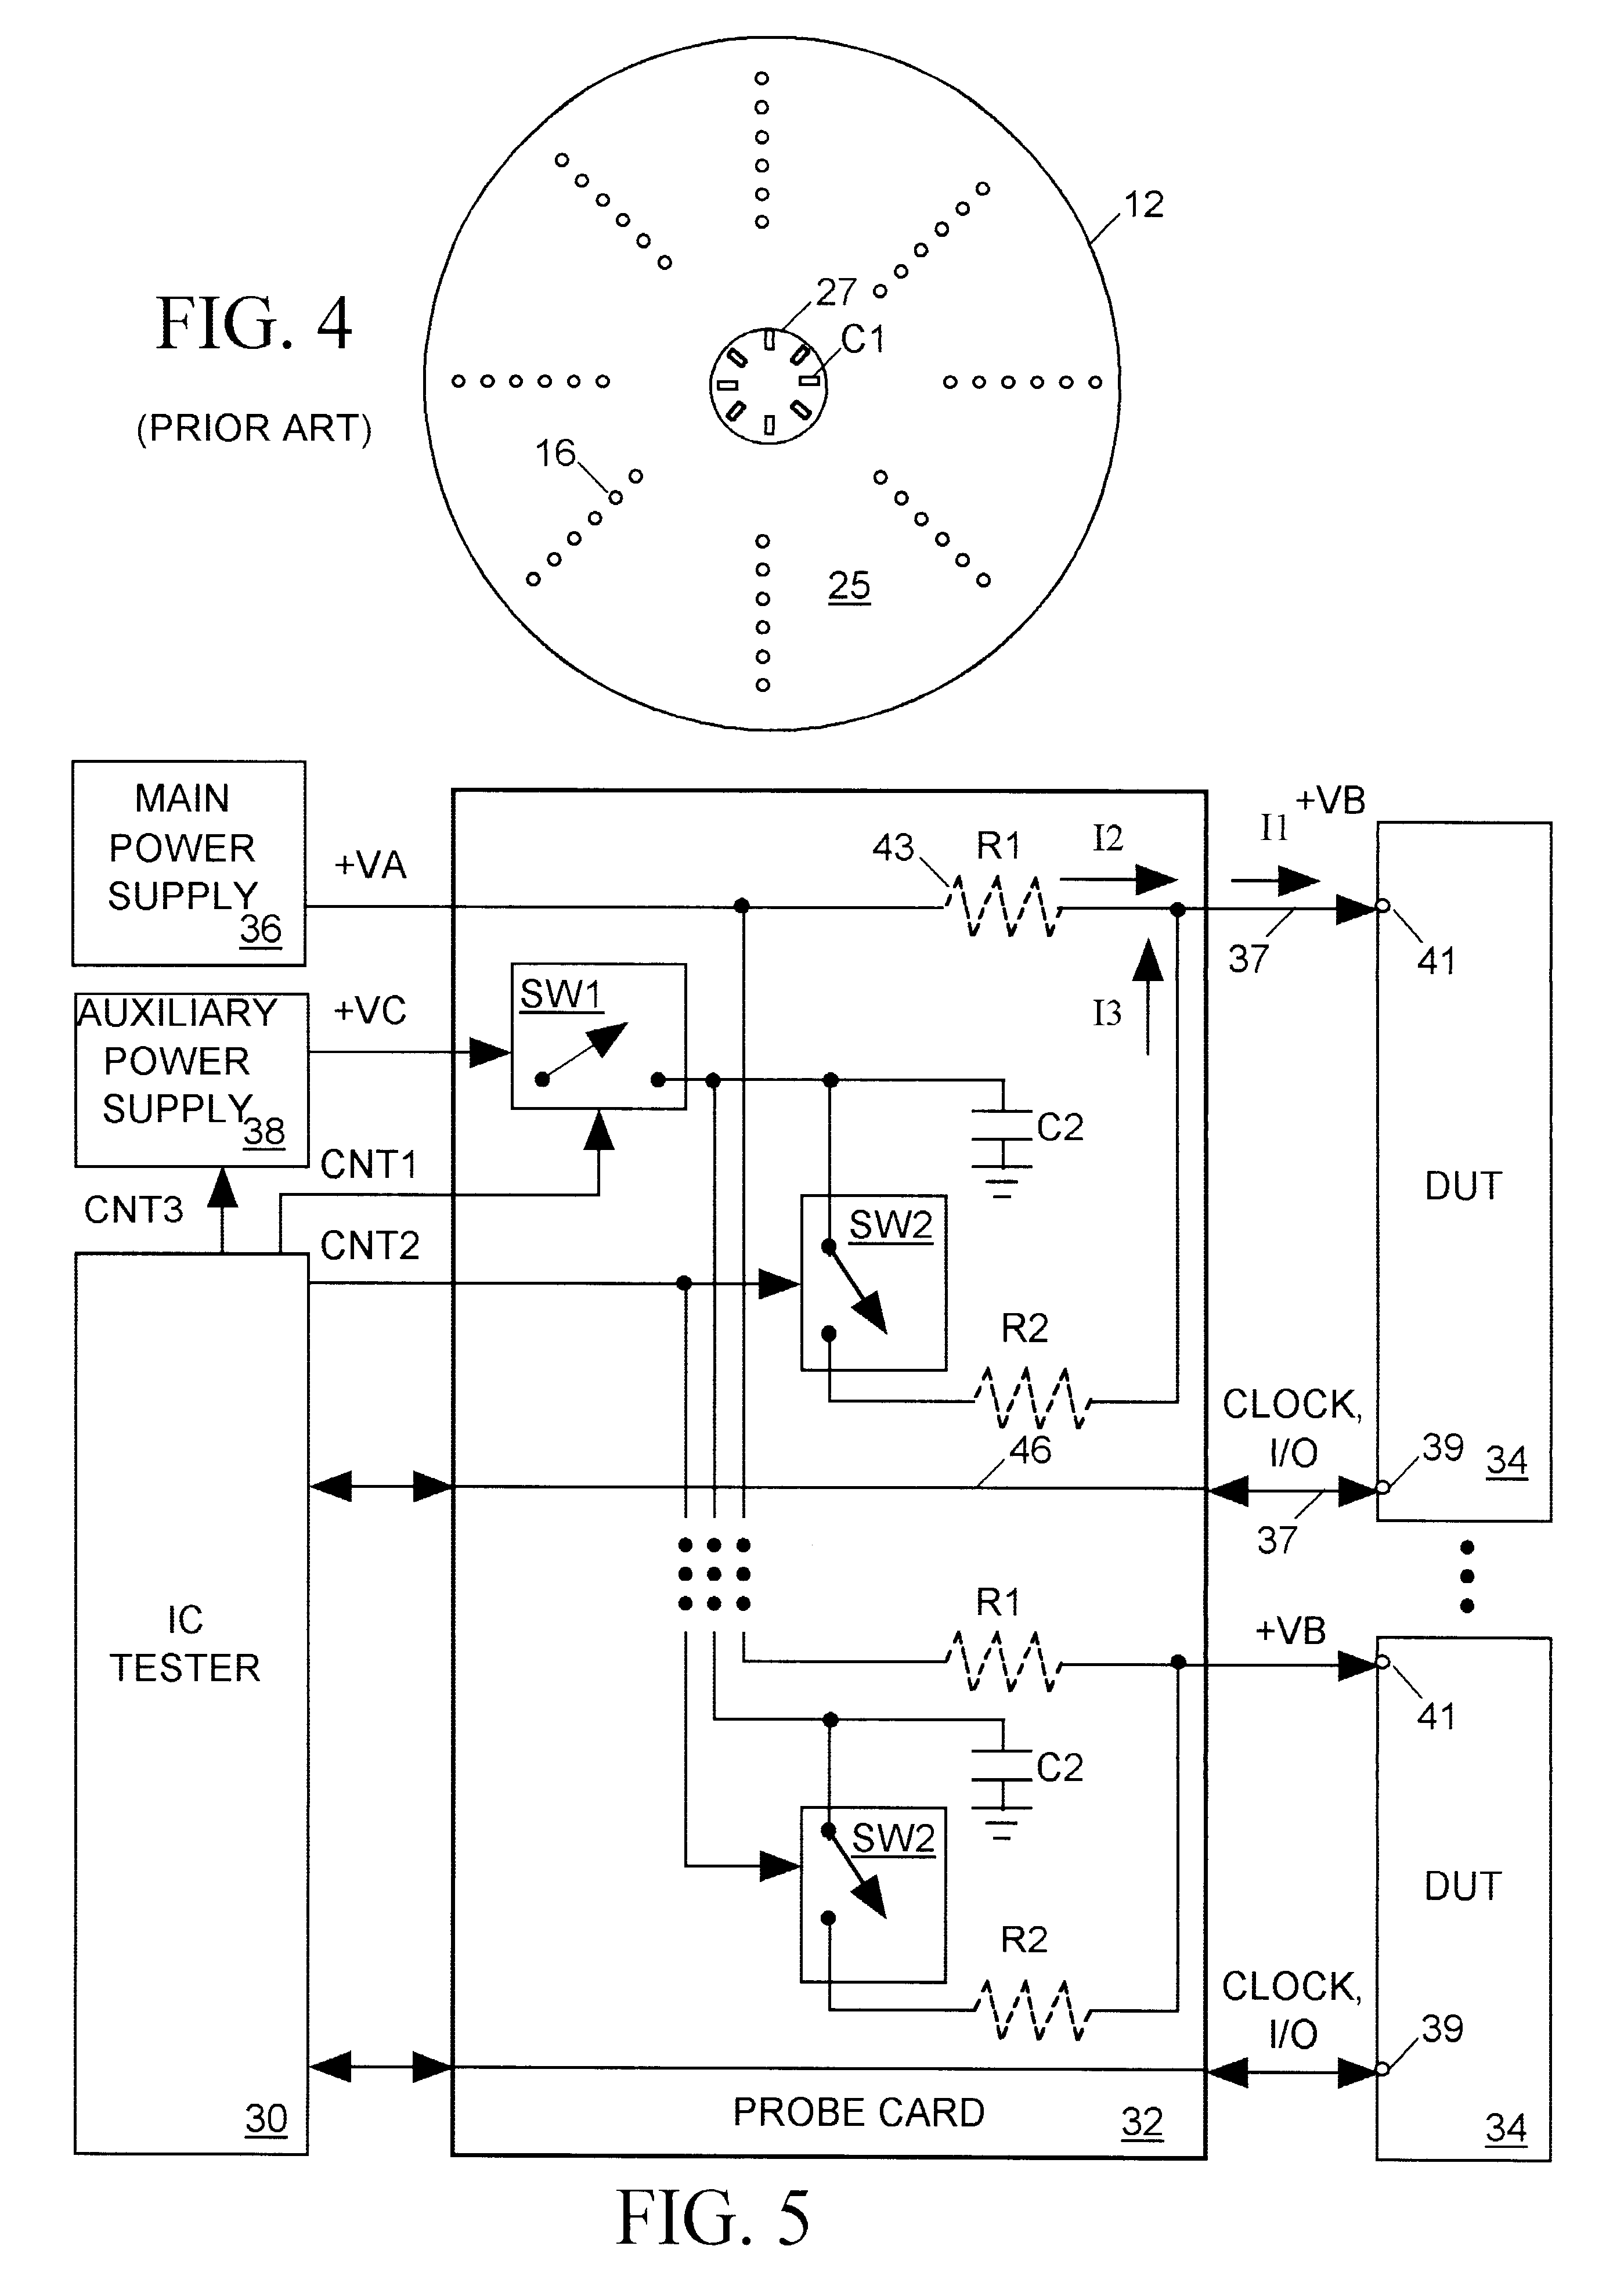 Predictive, adaptive power supply for an integrated circuit under test